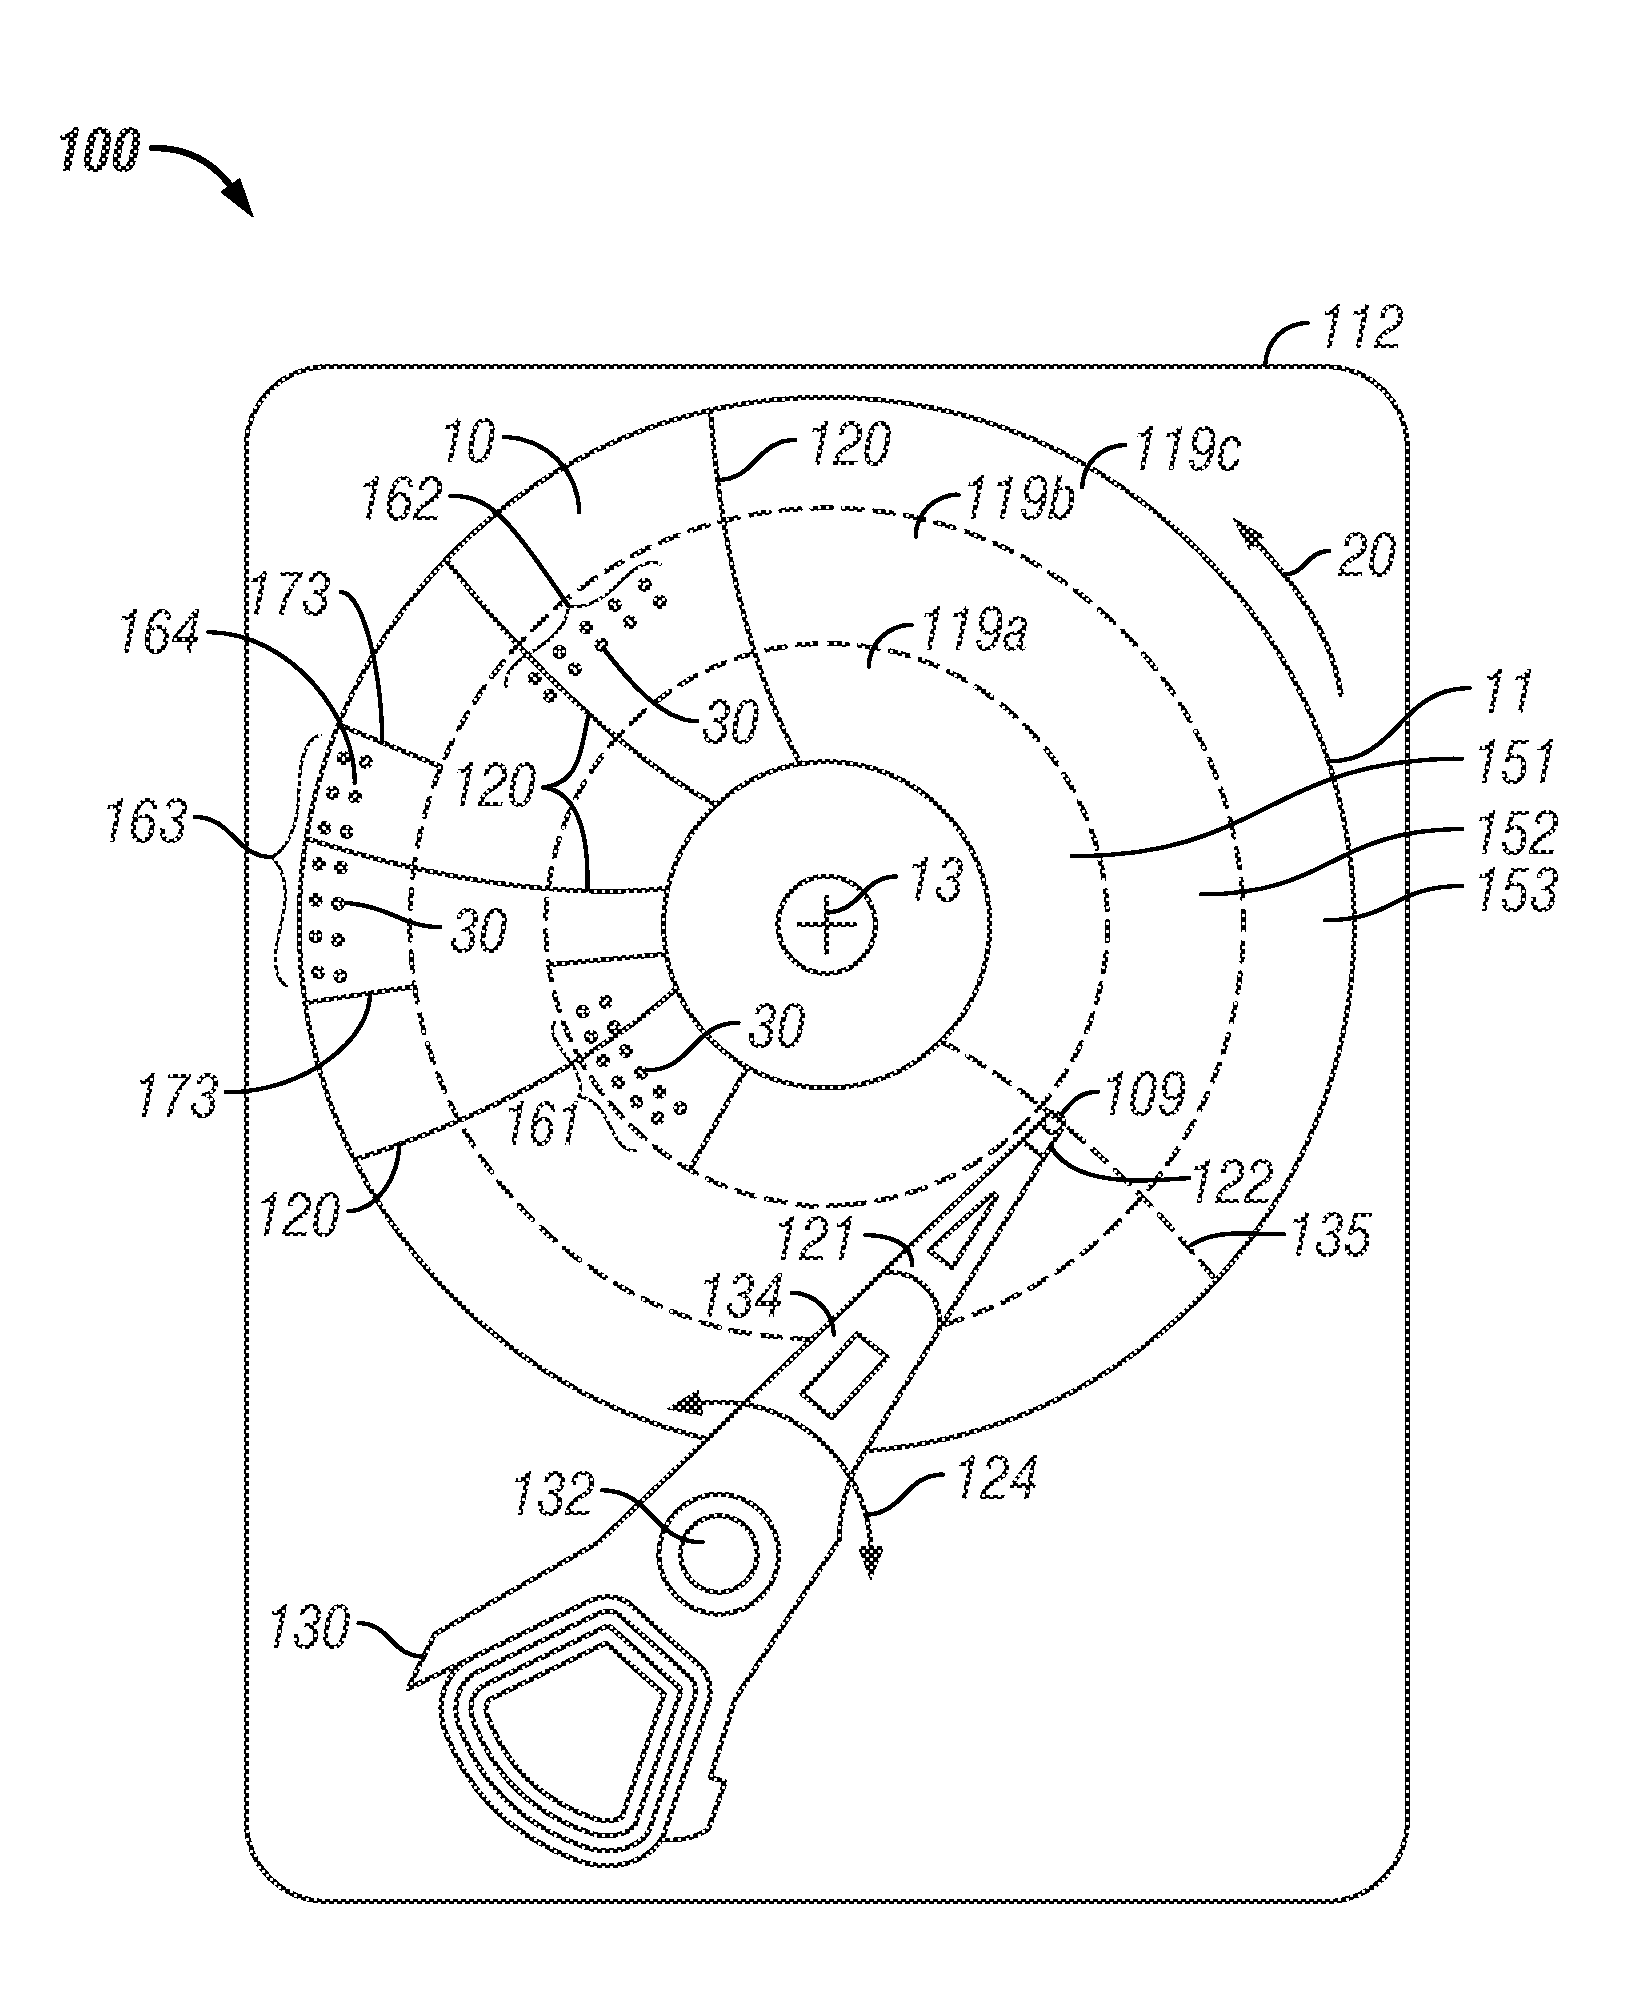 Thermally-assisted recording (TAR) patterned-media disk drive with optical detection of write synchronization and servo fields